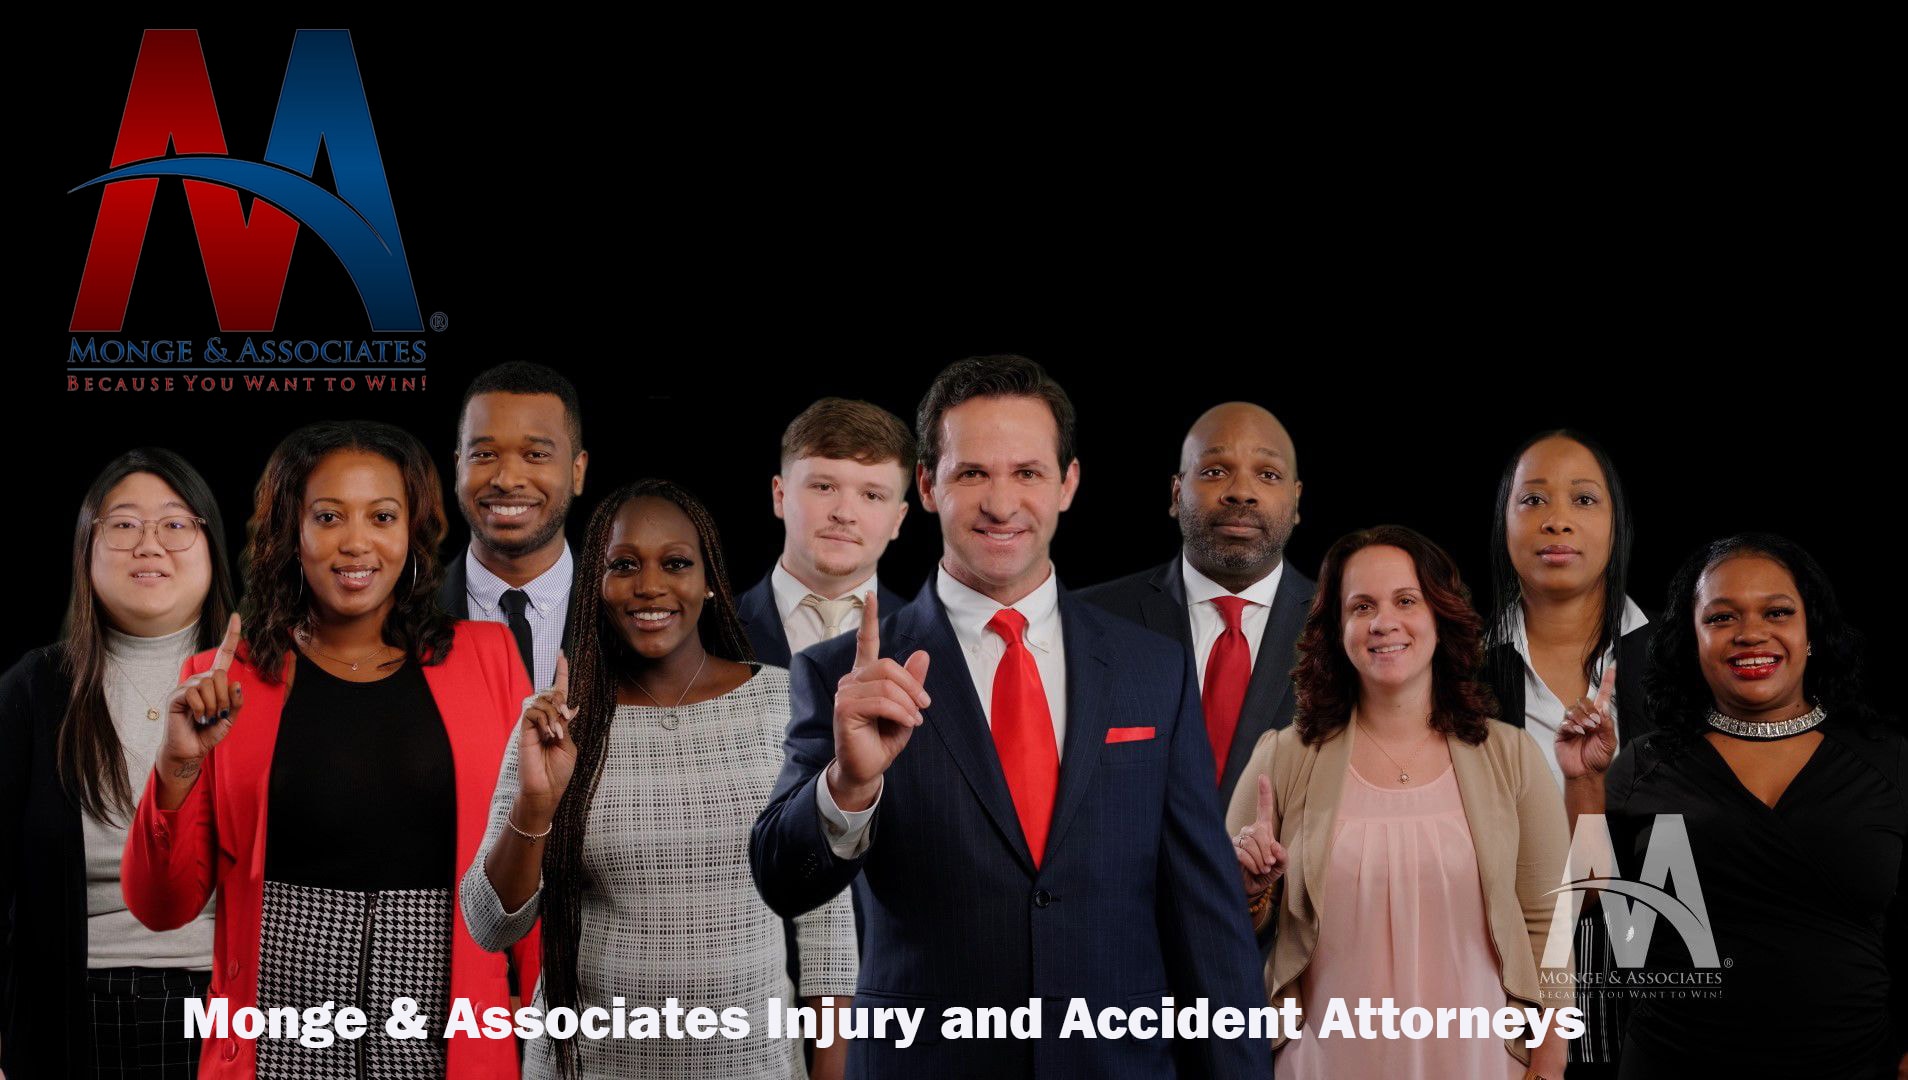 Monge & Associates Injury and Accident Attorneys - Chicago (IL 60622), US, vehicle crash attorney